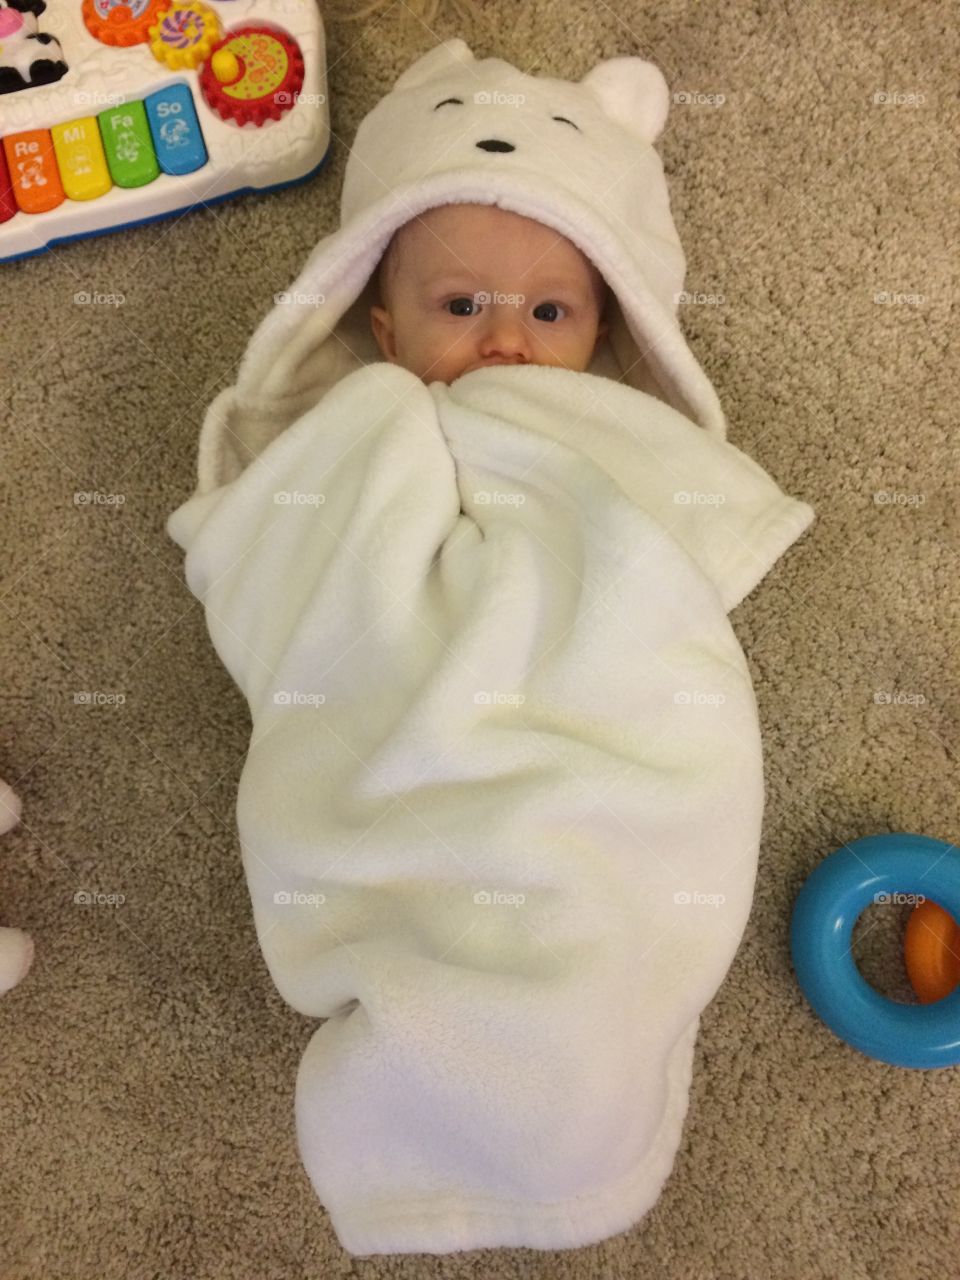 Baby after bath